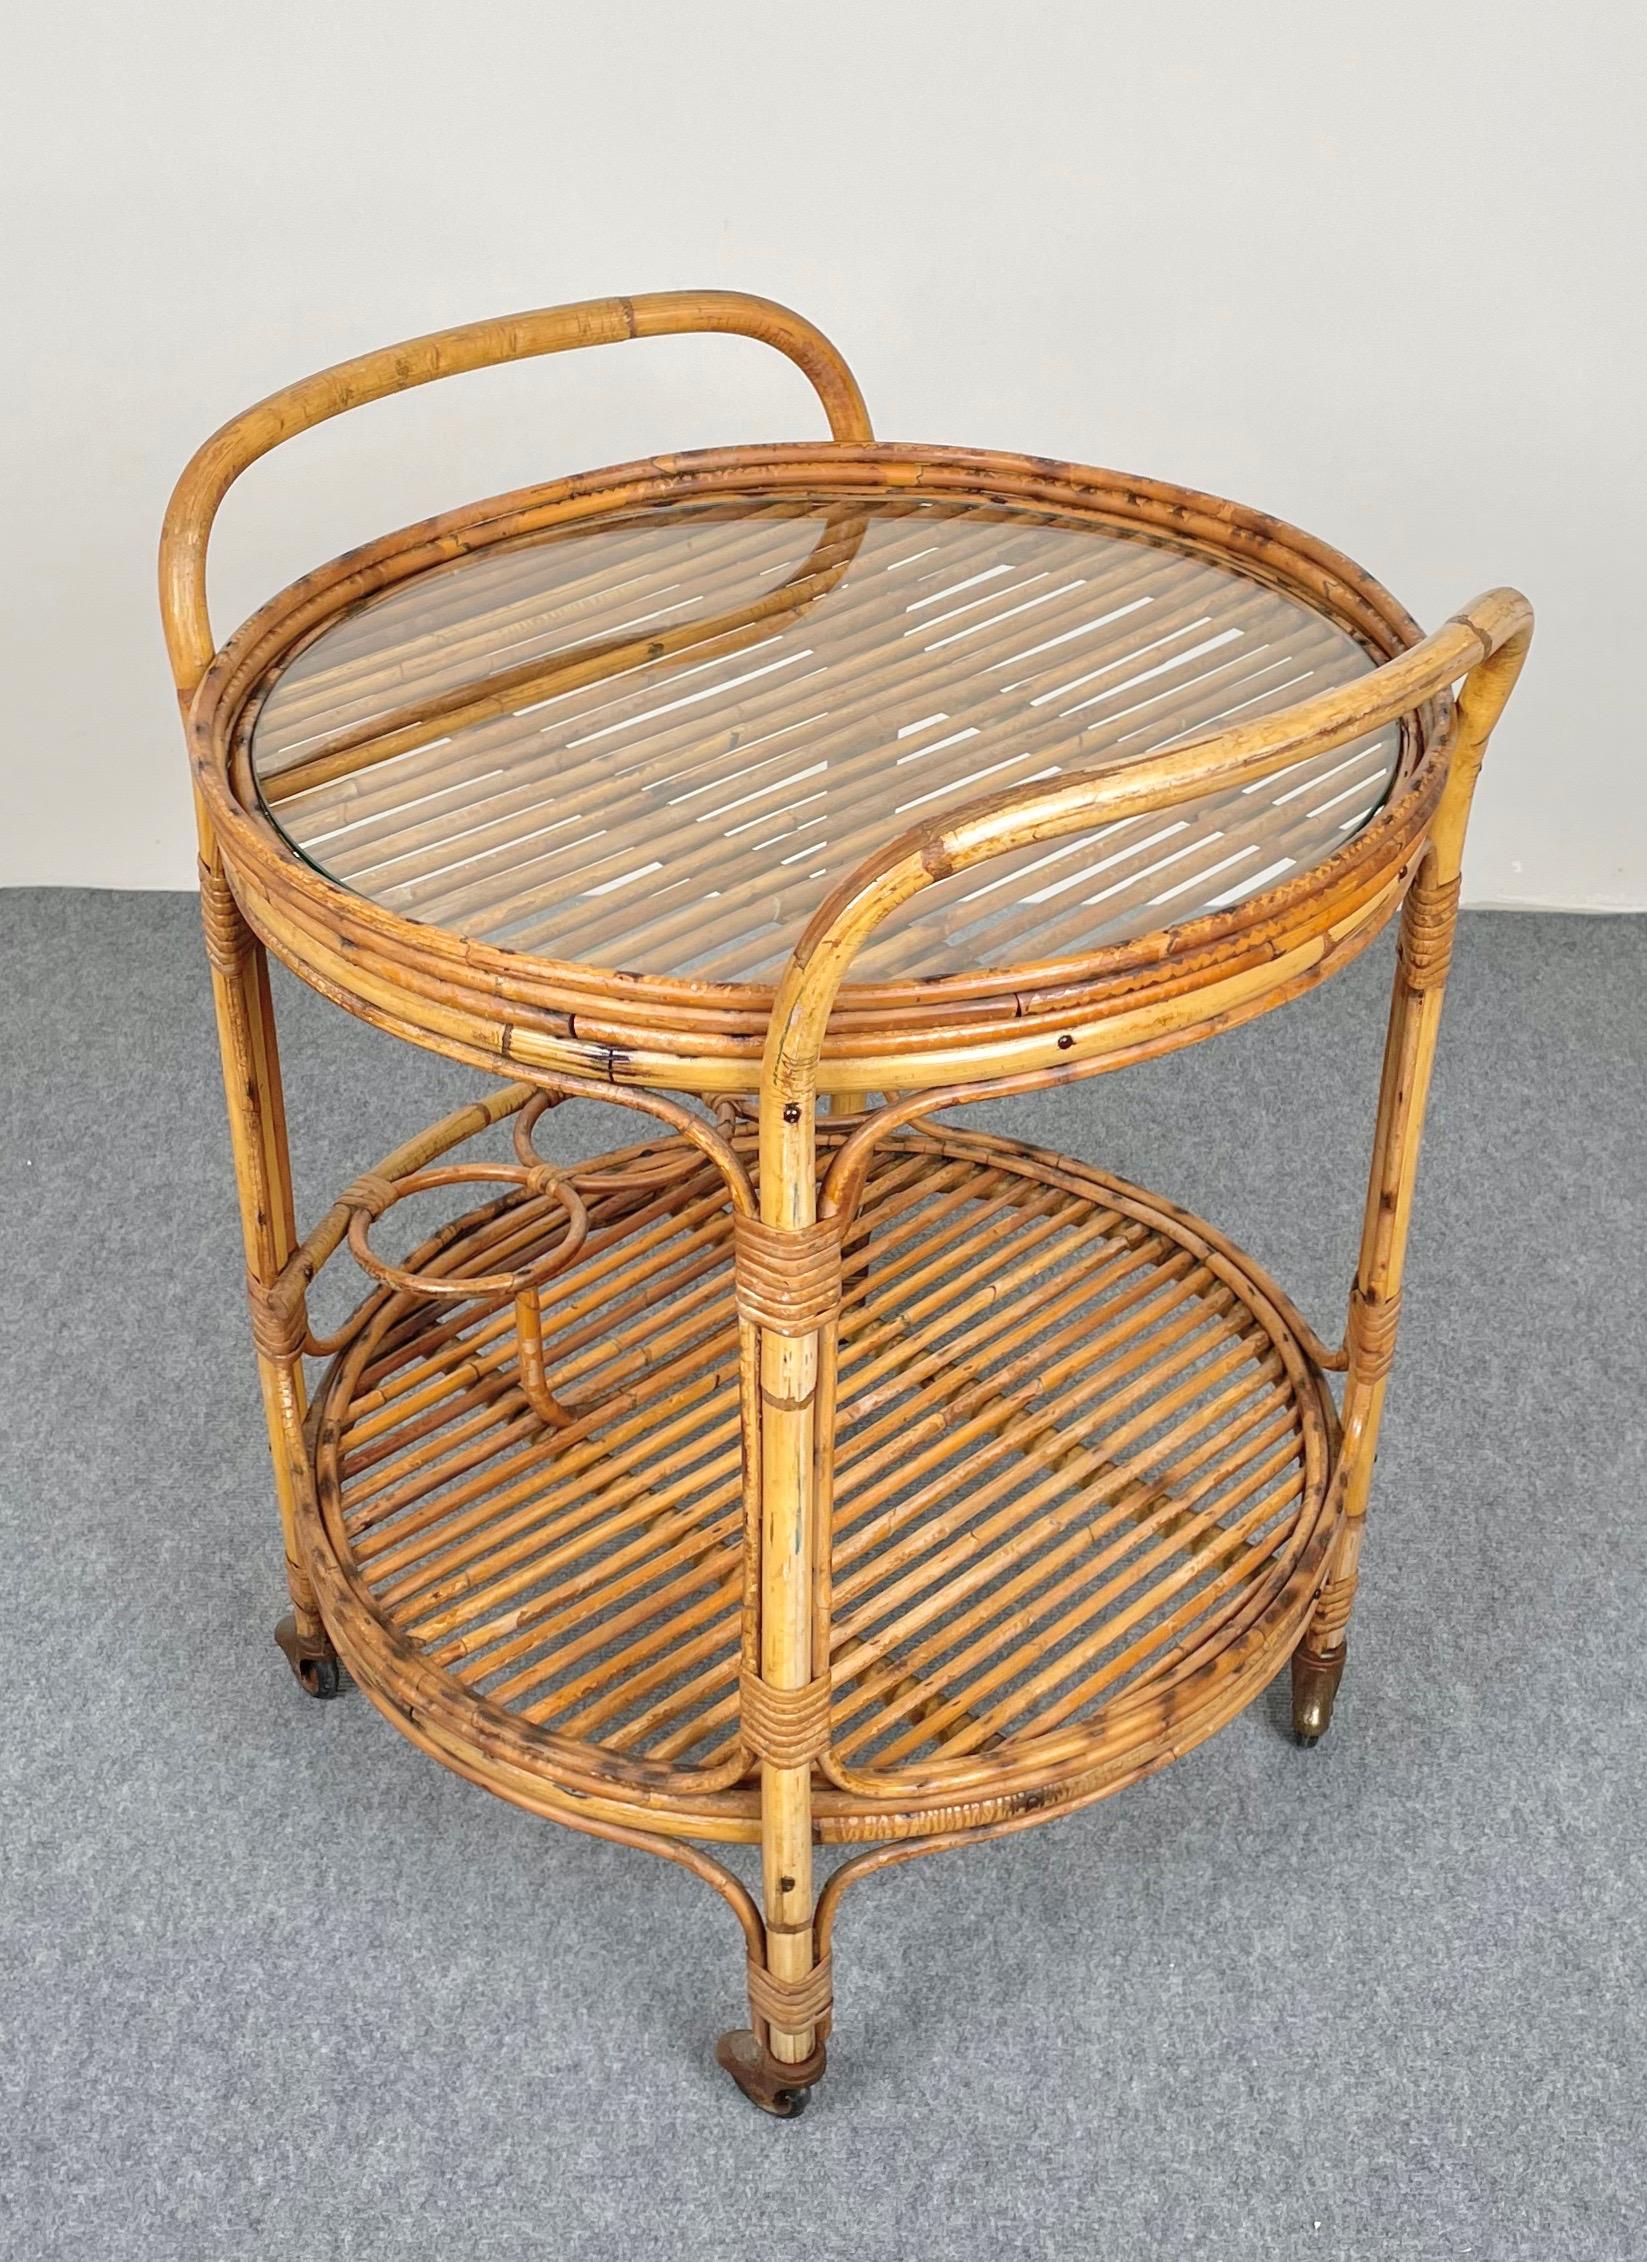 Round serving bar cart in bamboo & rattan structure featuring two shelves. The upper one is covered by a glass top and the lower one features three bottle holders. Made in Italy in the 1960s.